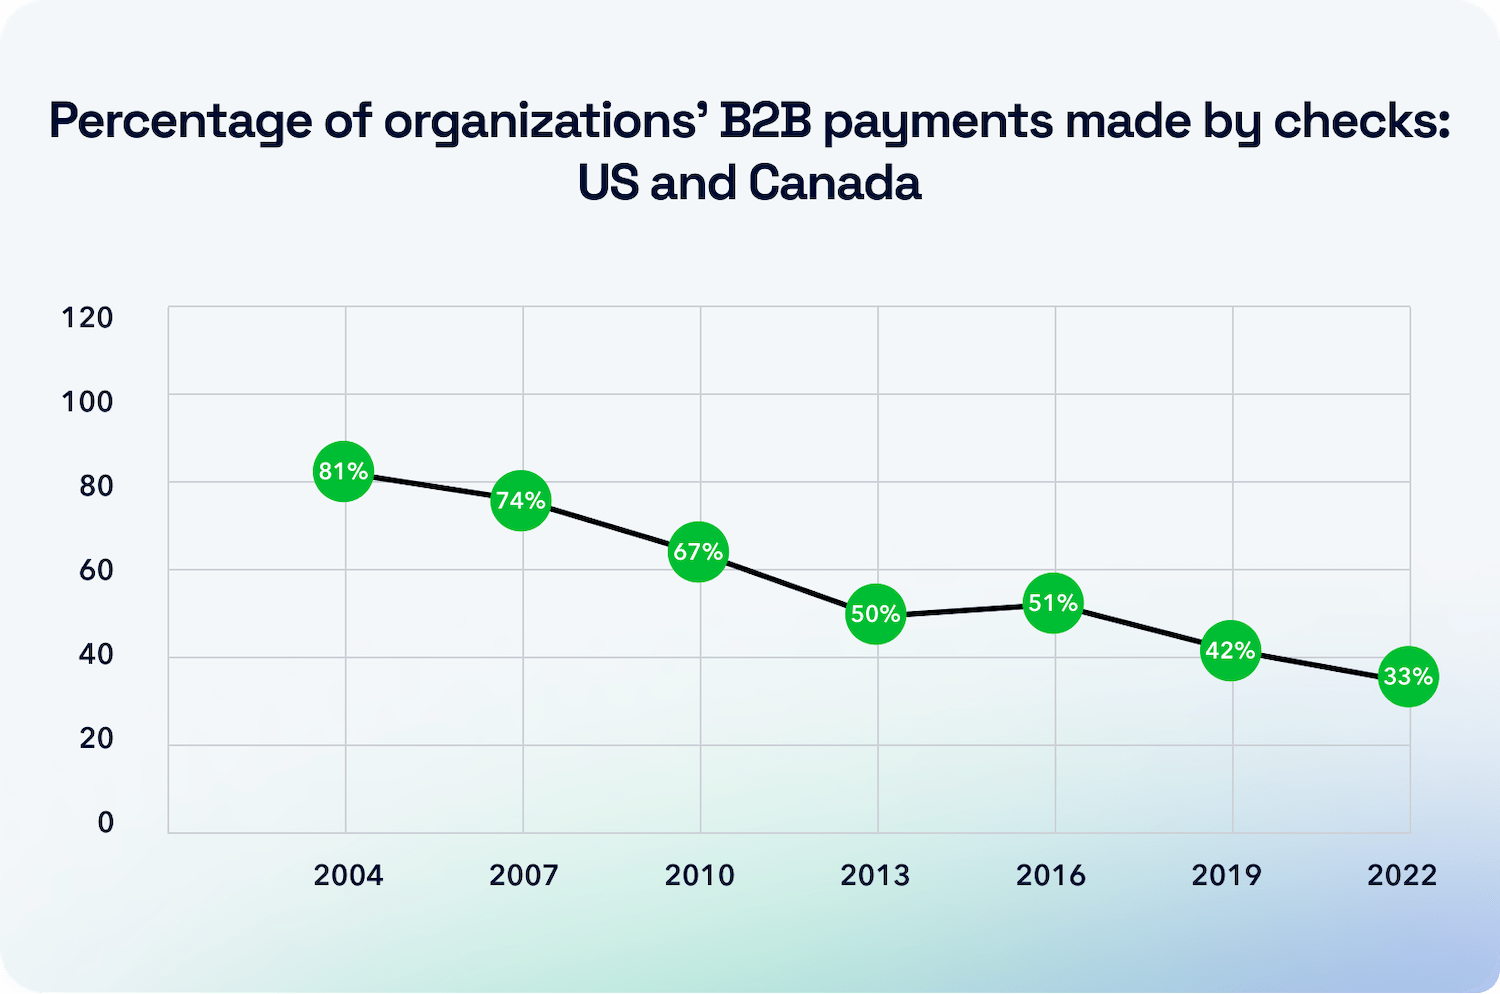 B2B payments made by checks in the US & Canada: Decreased from 81% in 2004 to 33% in 2022